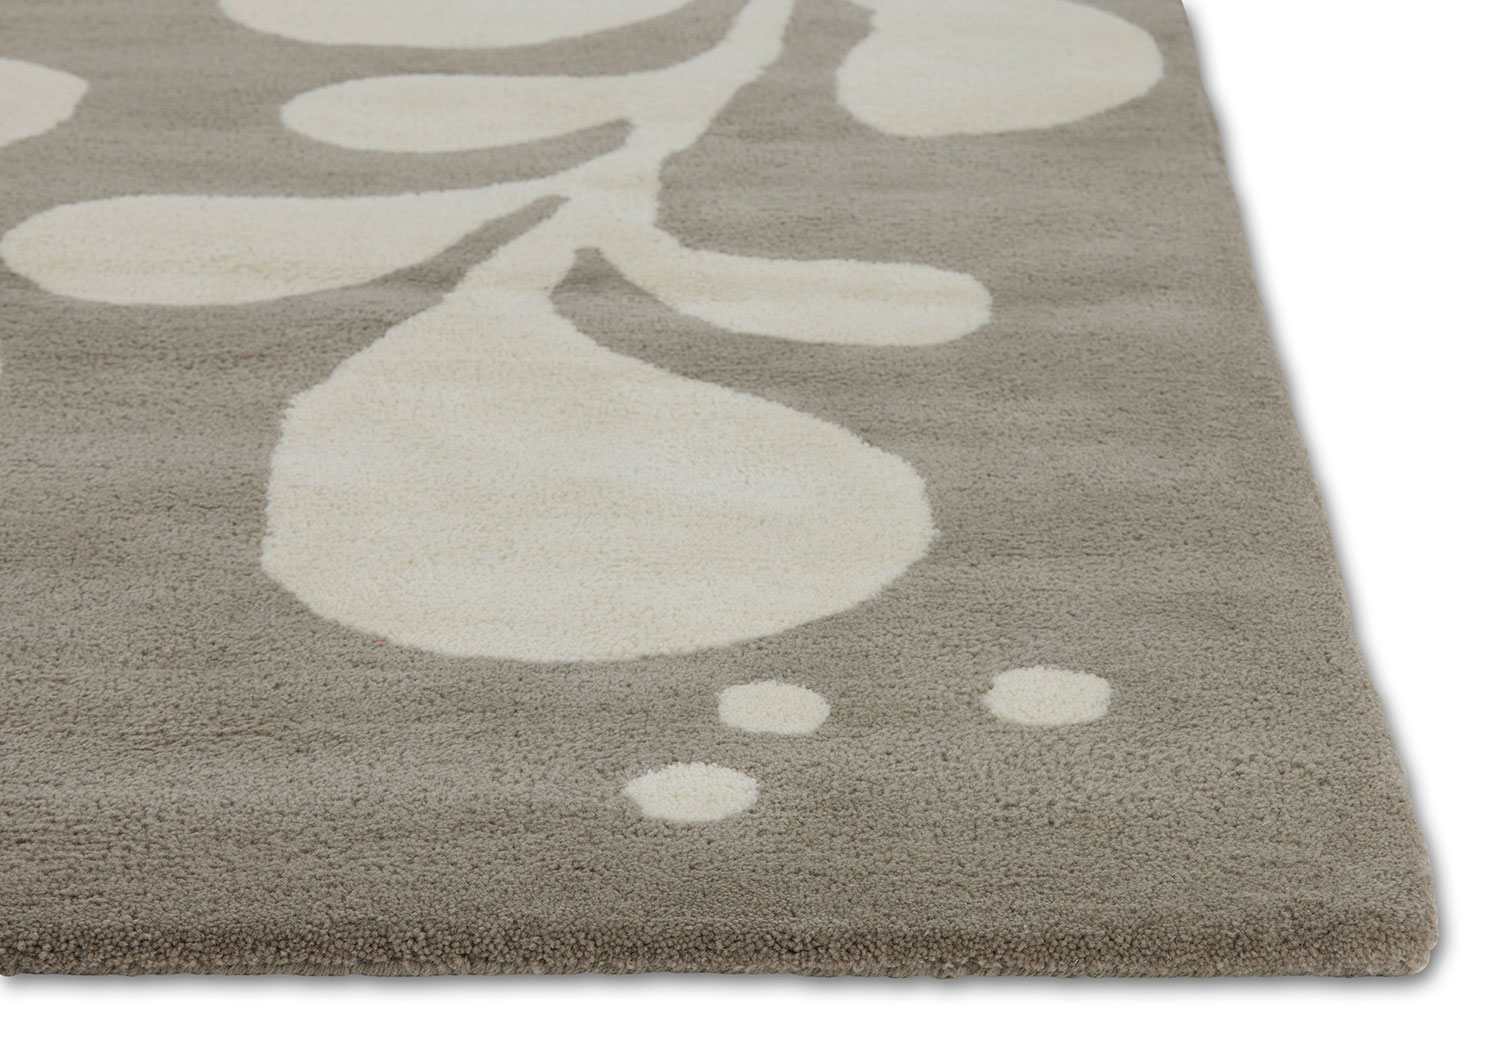 Corner detail of a neutral and gray area rug with abstract designs on it called Vine Swoosh